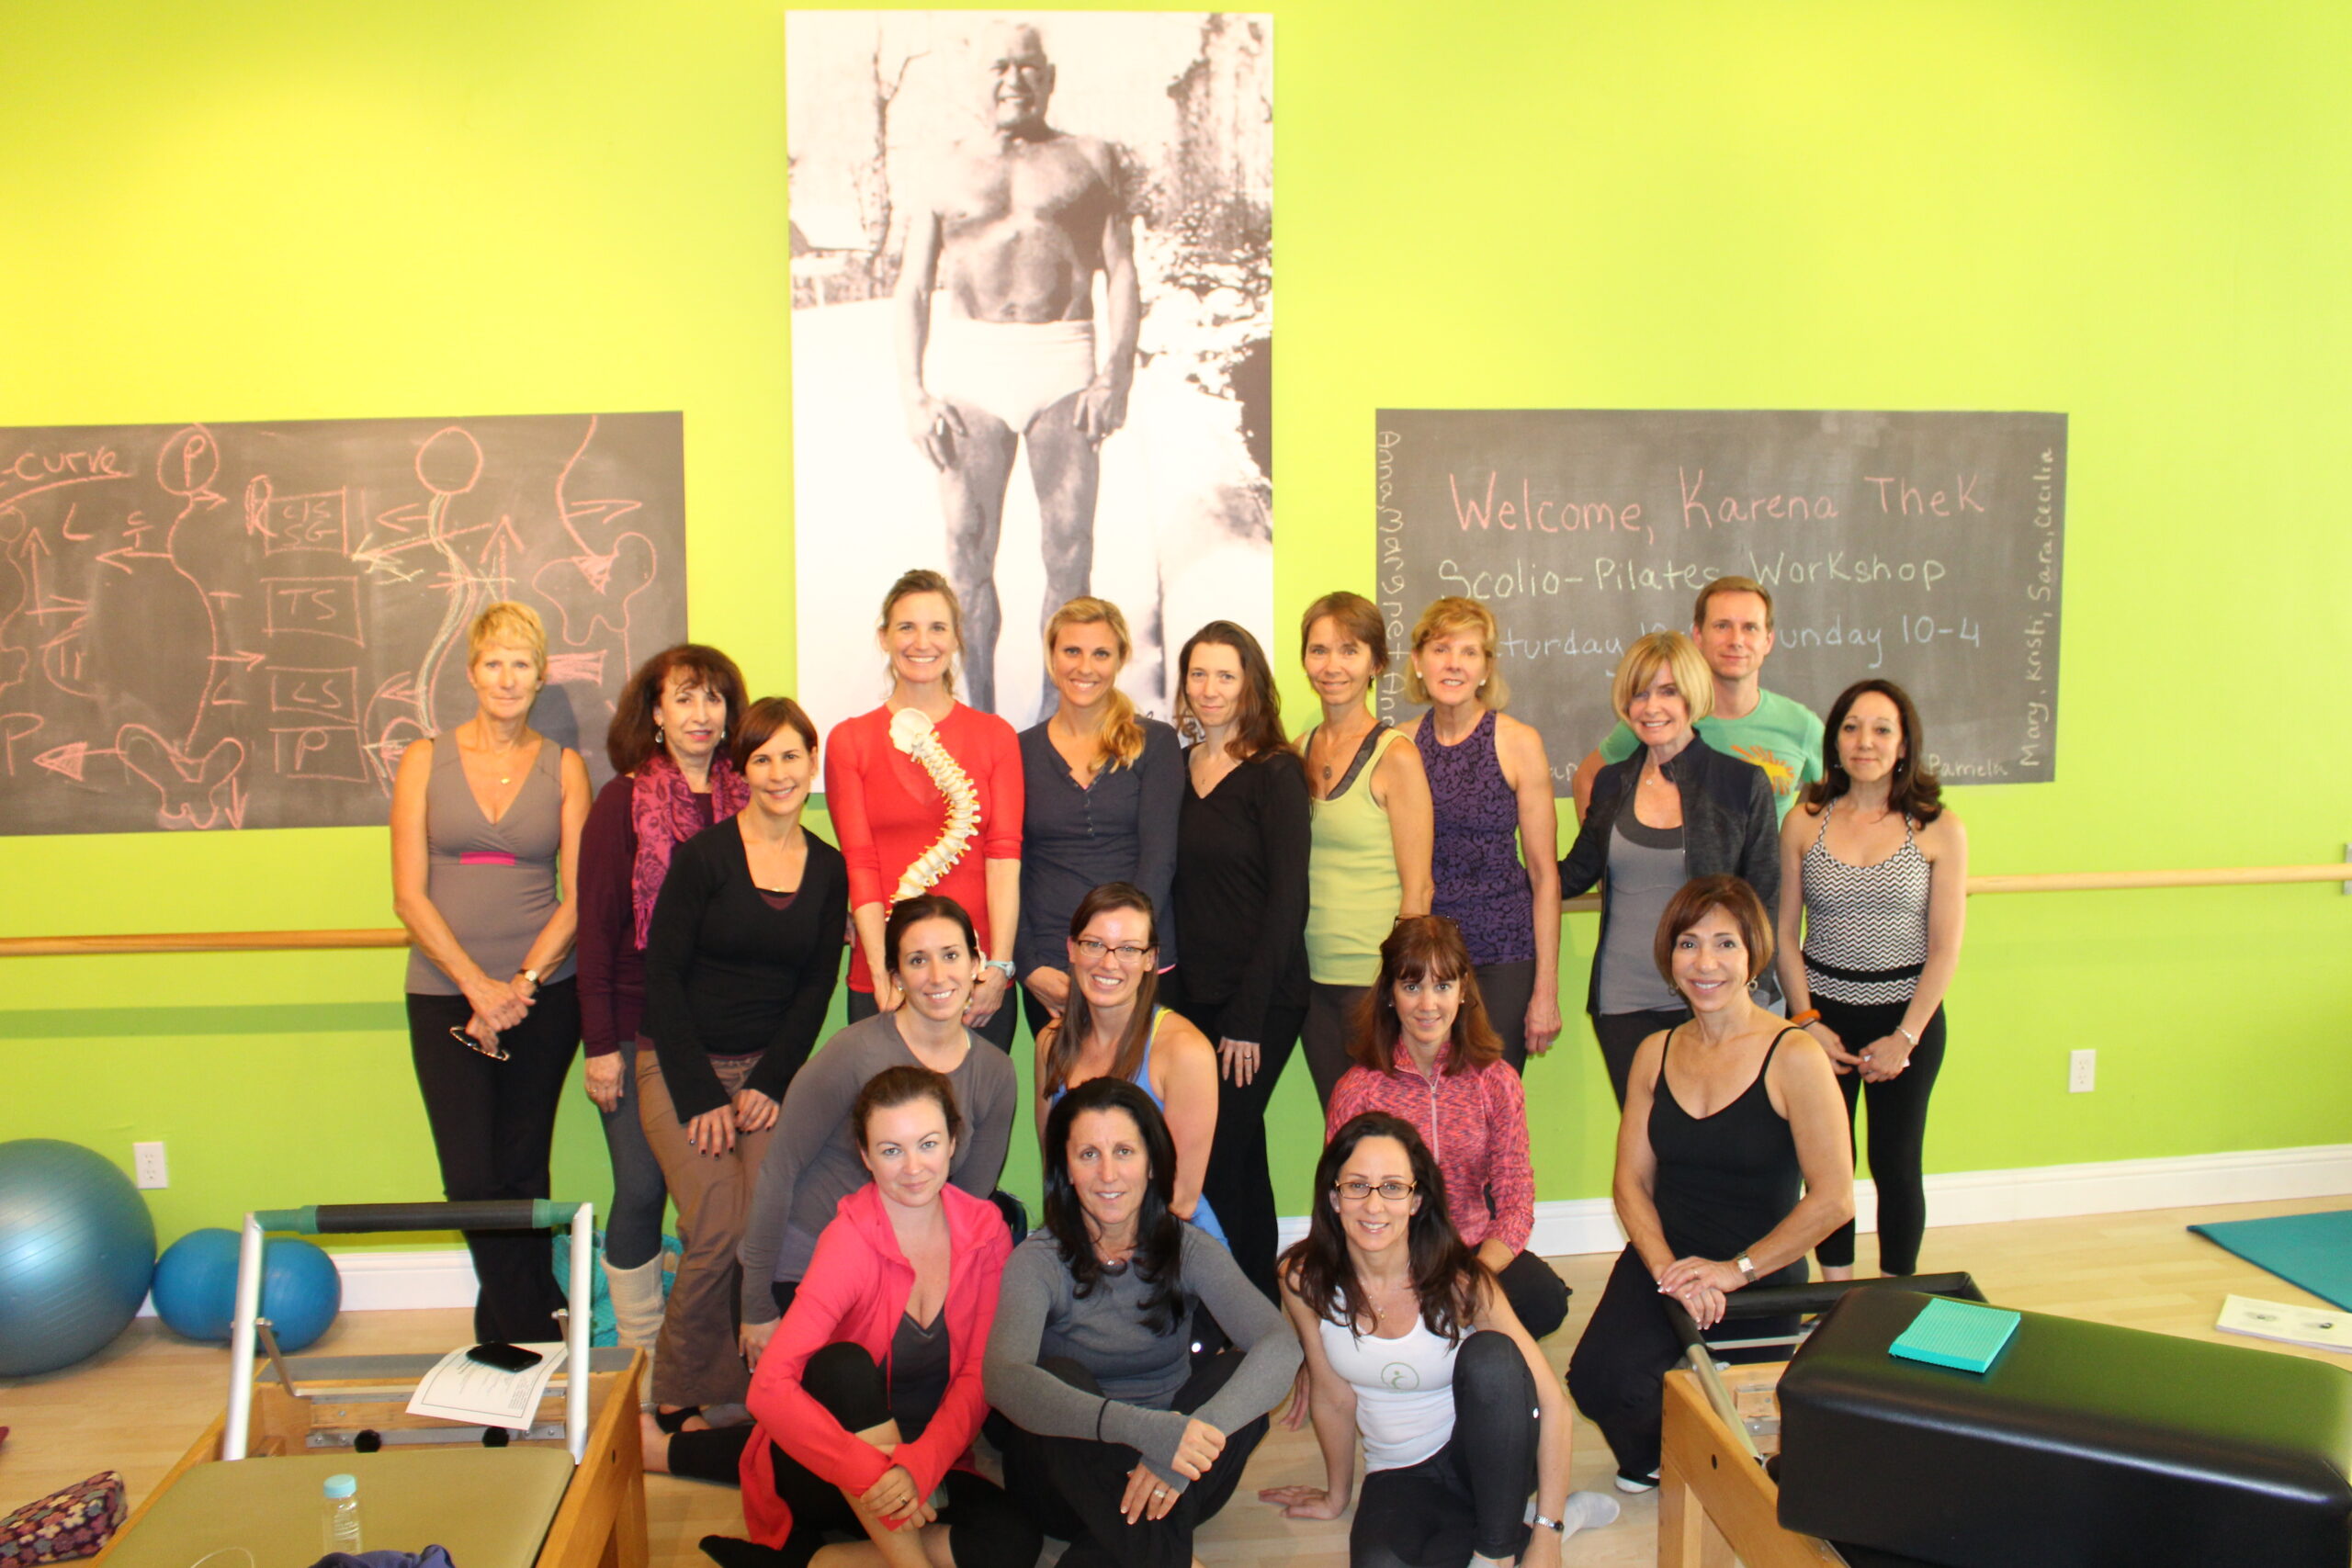 Continuing Education for Pilates Instructors and Physical Therapists